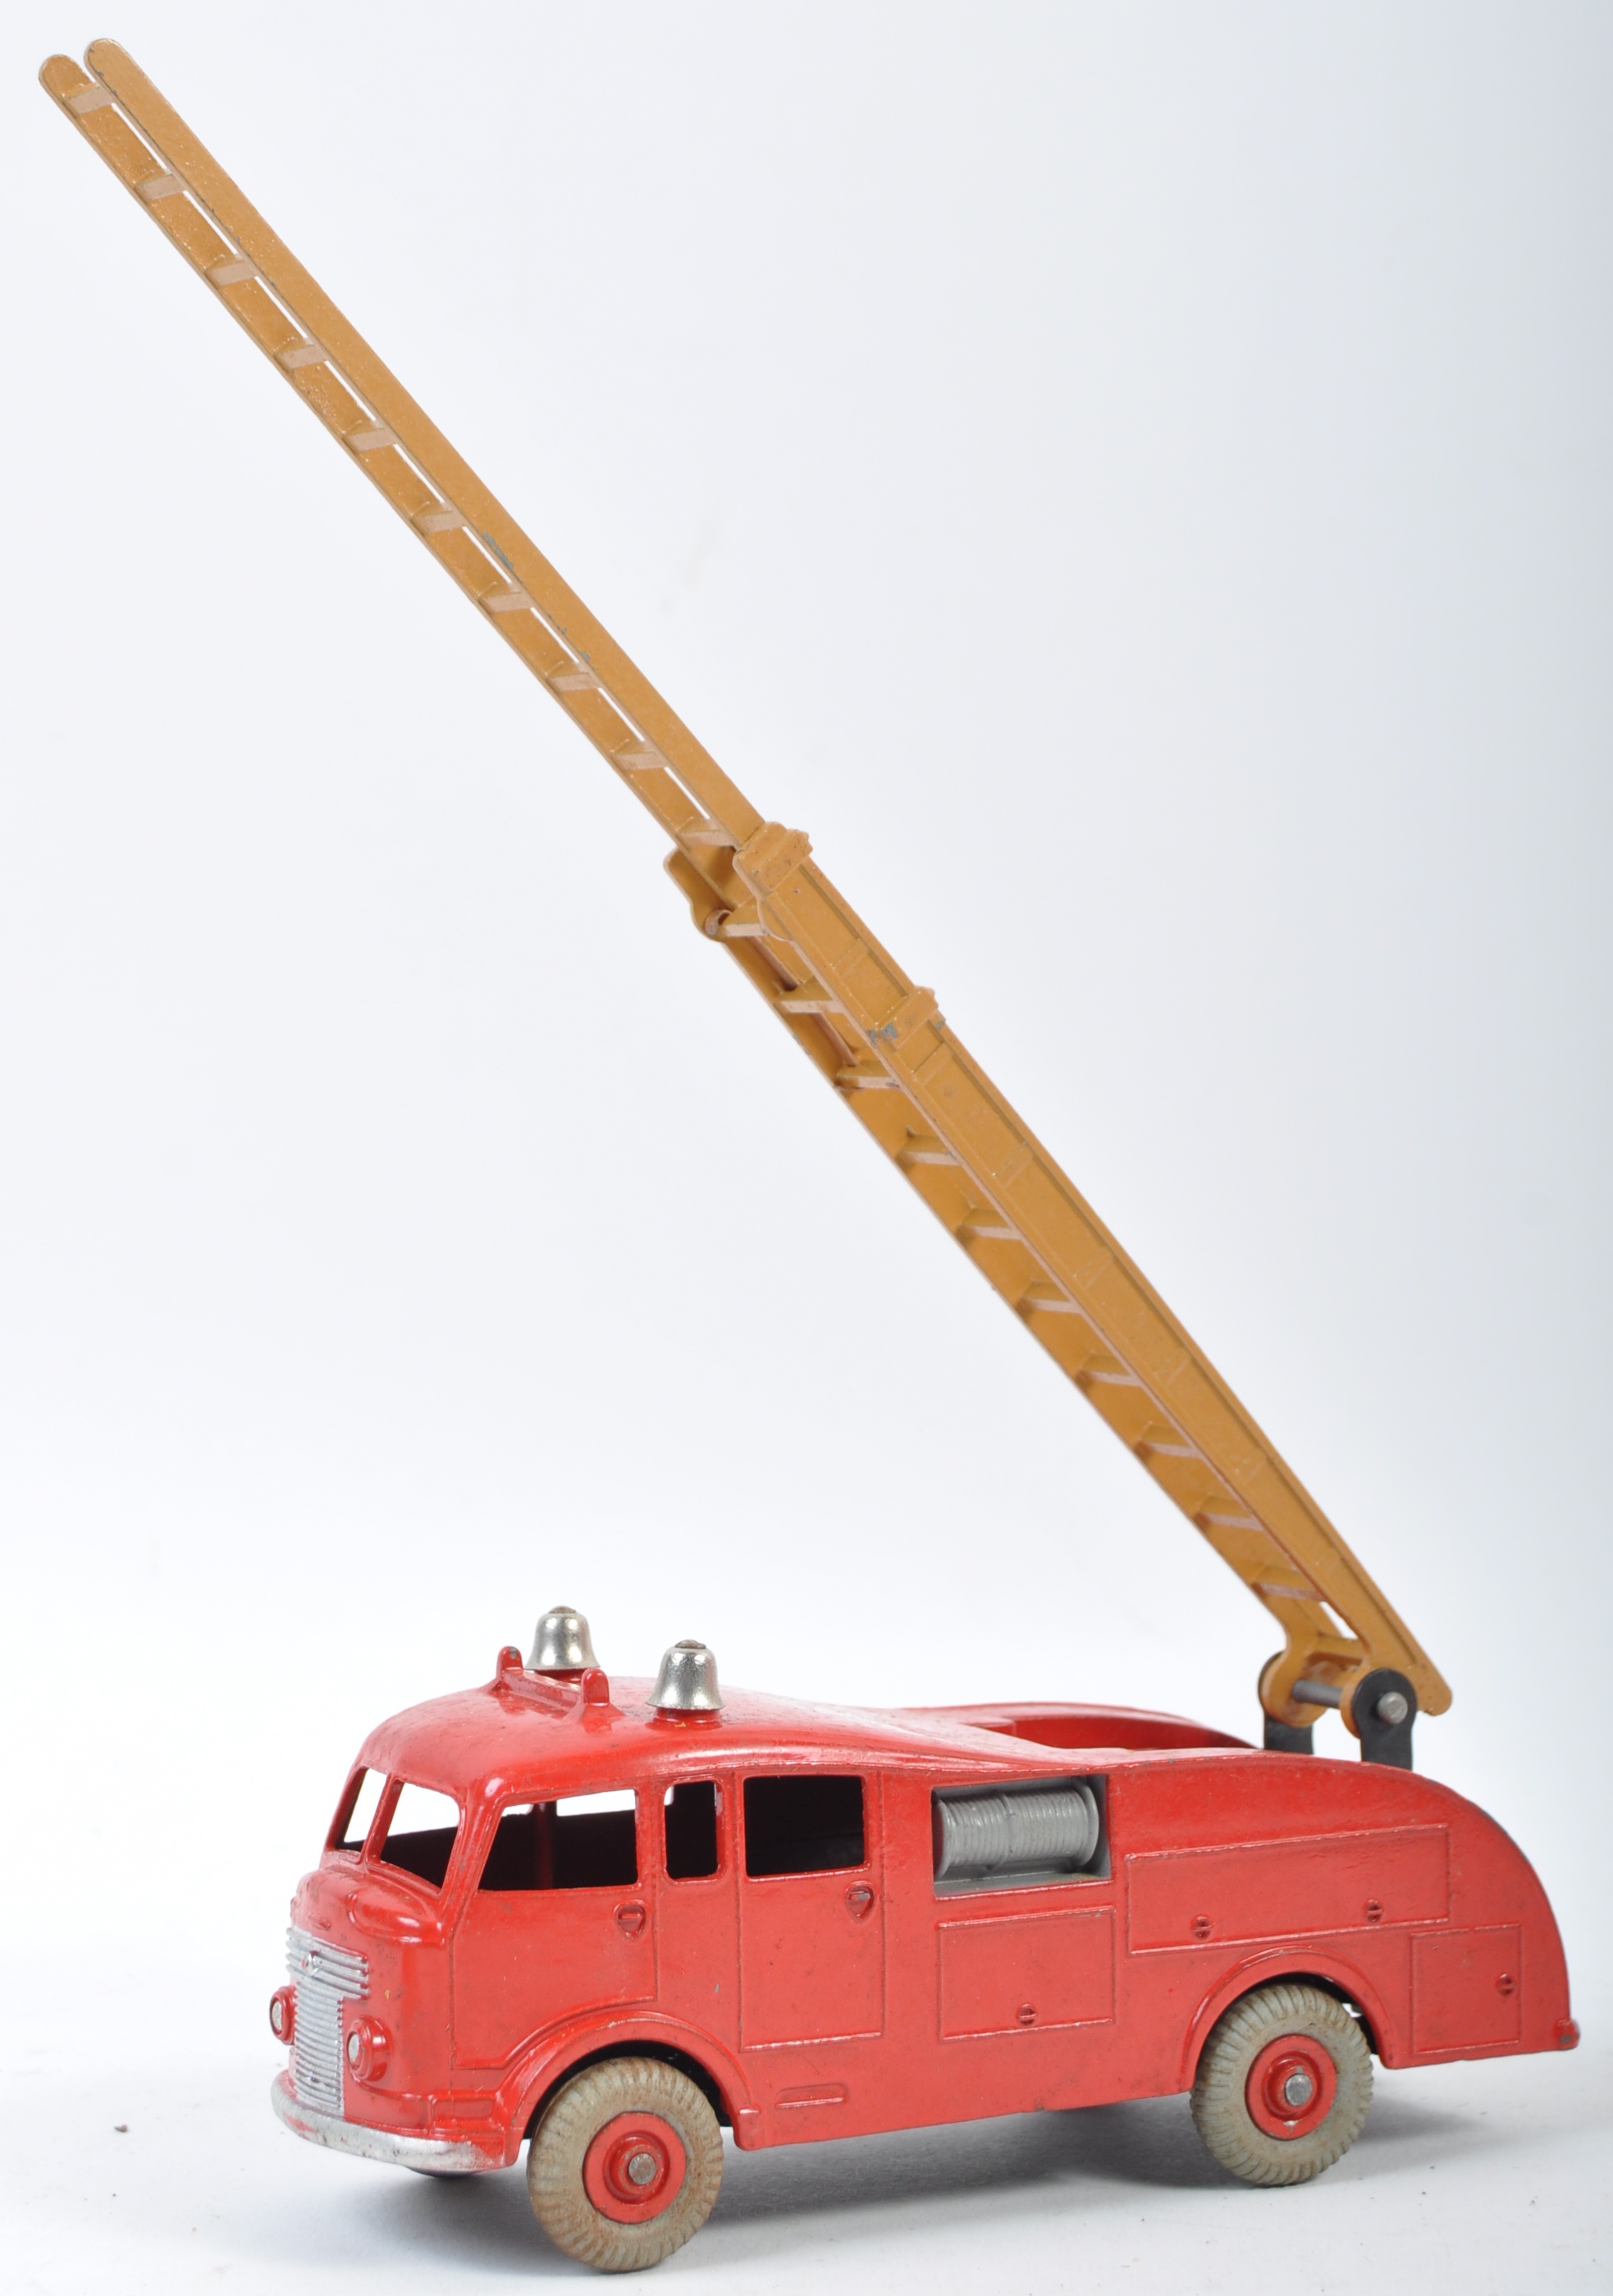 DINKY TOYS NO 555 FIRE ENGINE WITH BROWN LADDER AND RED HUBS - Image 4 of 8